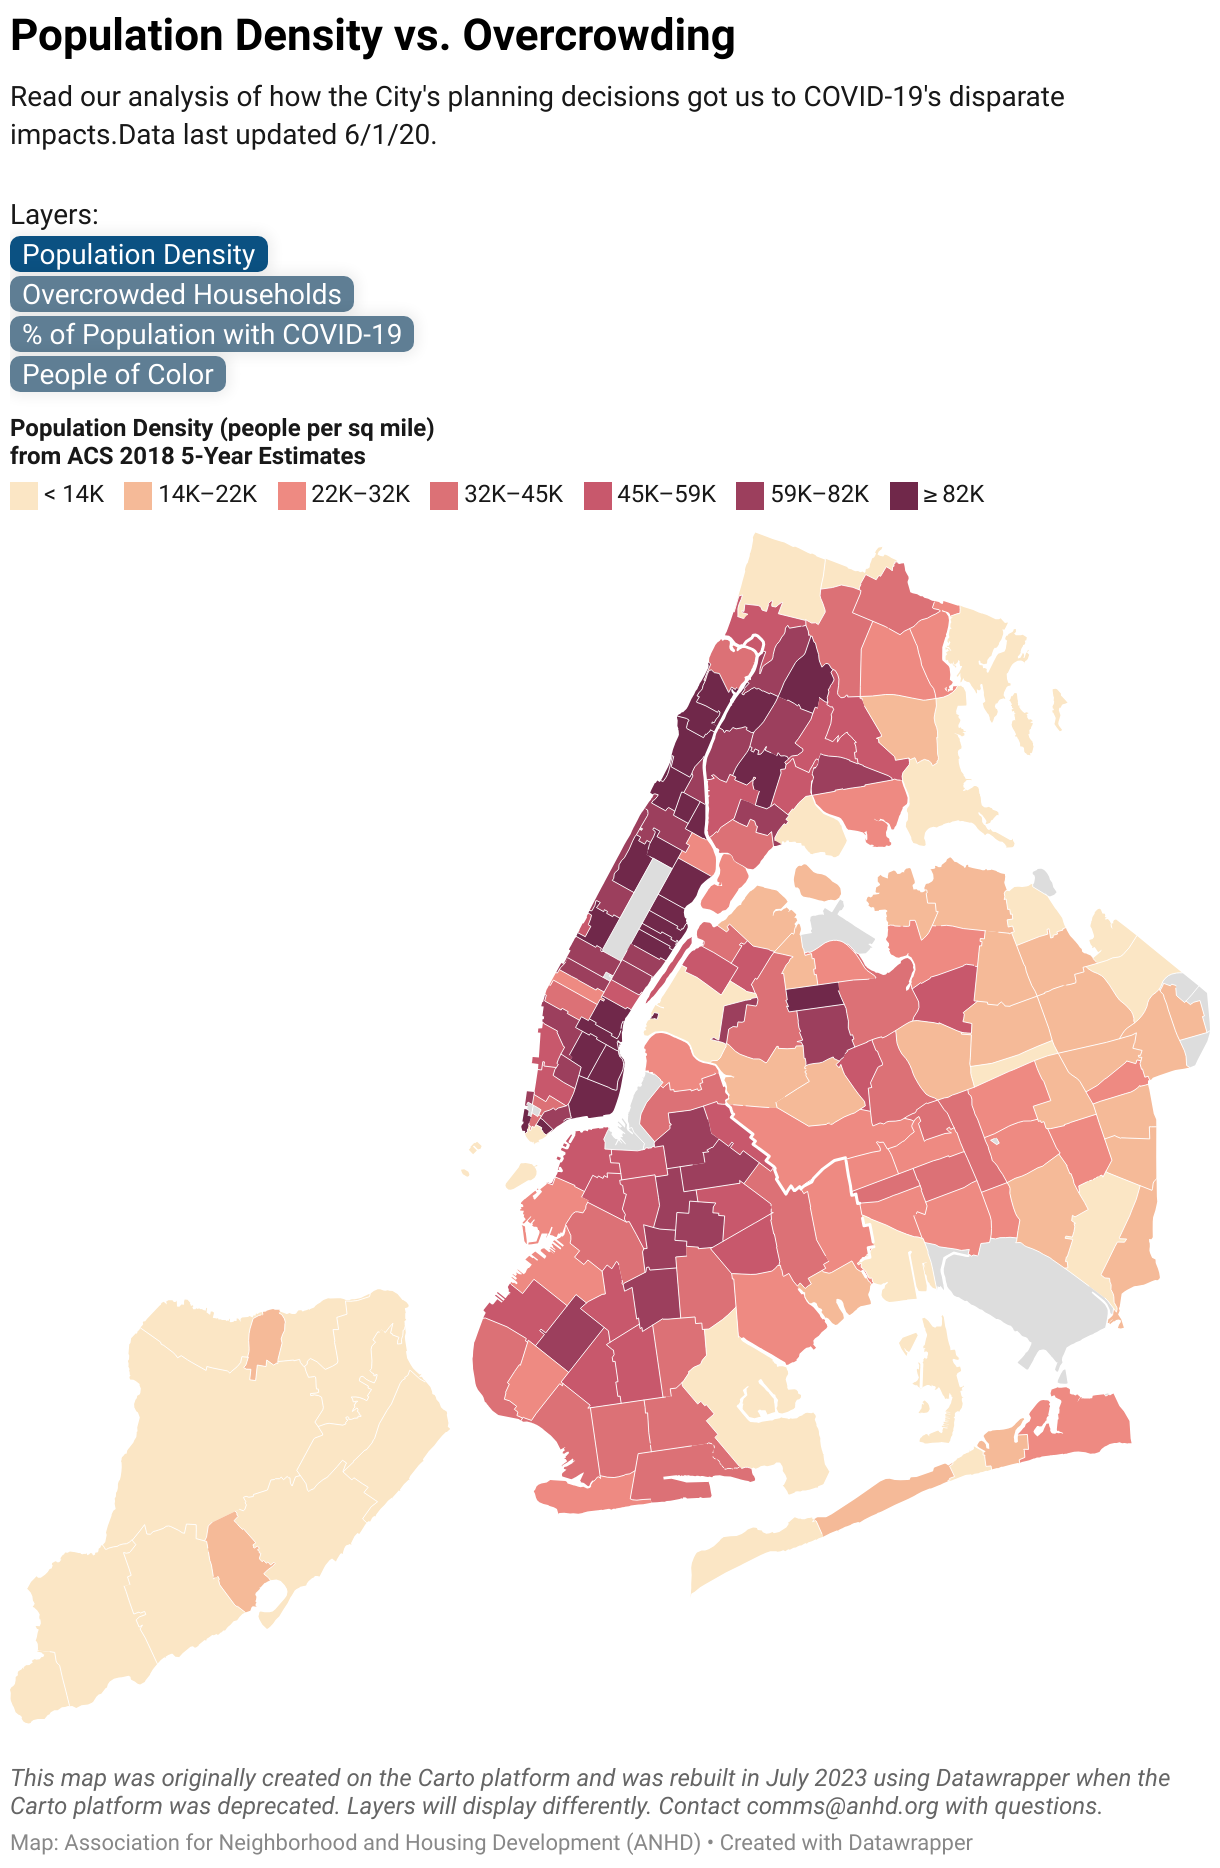 Map of population density by zip code in New York City, data as of 2018